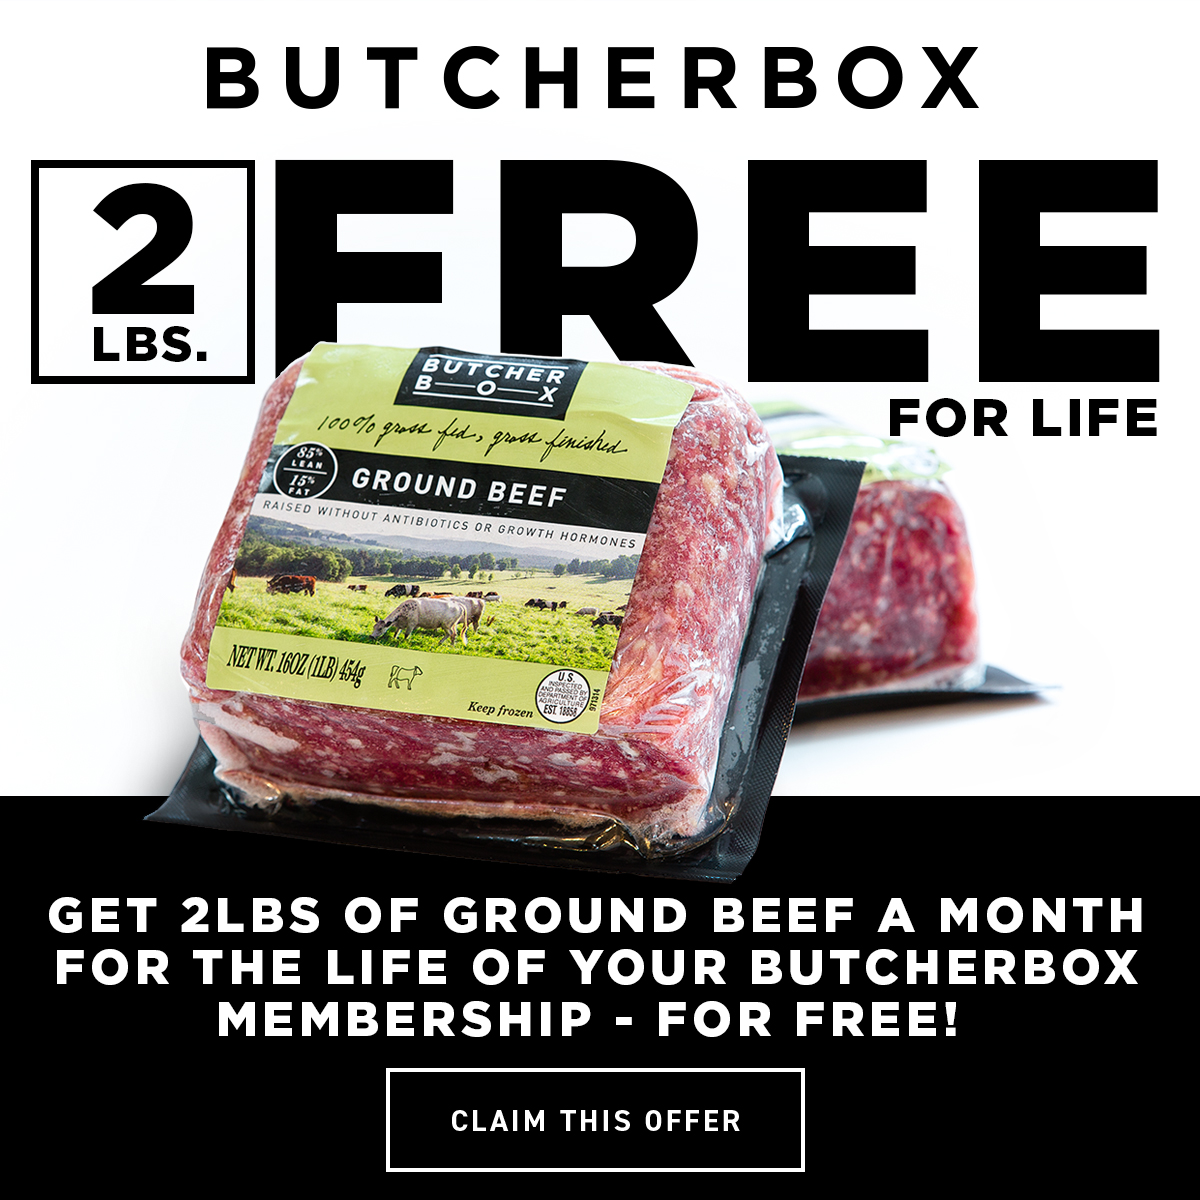 ButcherBox's Ground Beef for Life